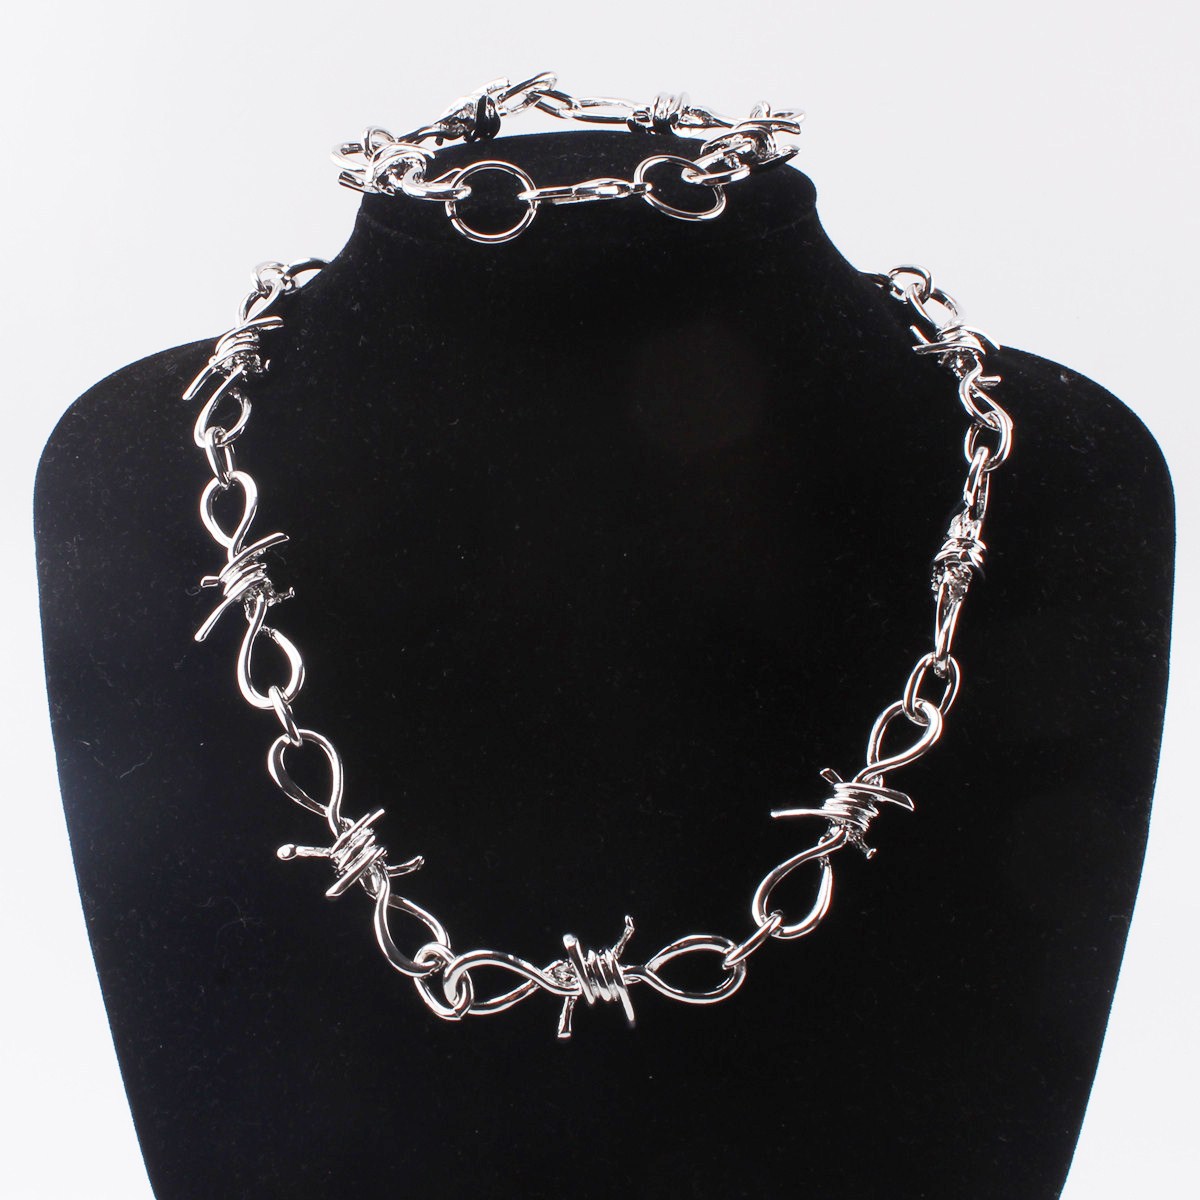 1 Piece Thorns Iron Pants Chain Men and Women Clavicle Choker Cool